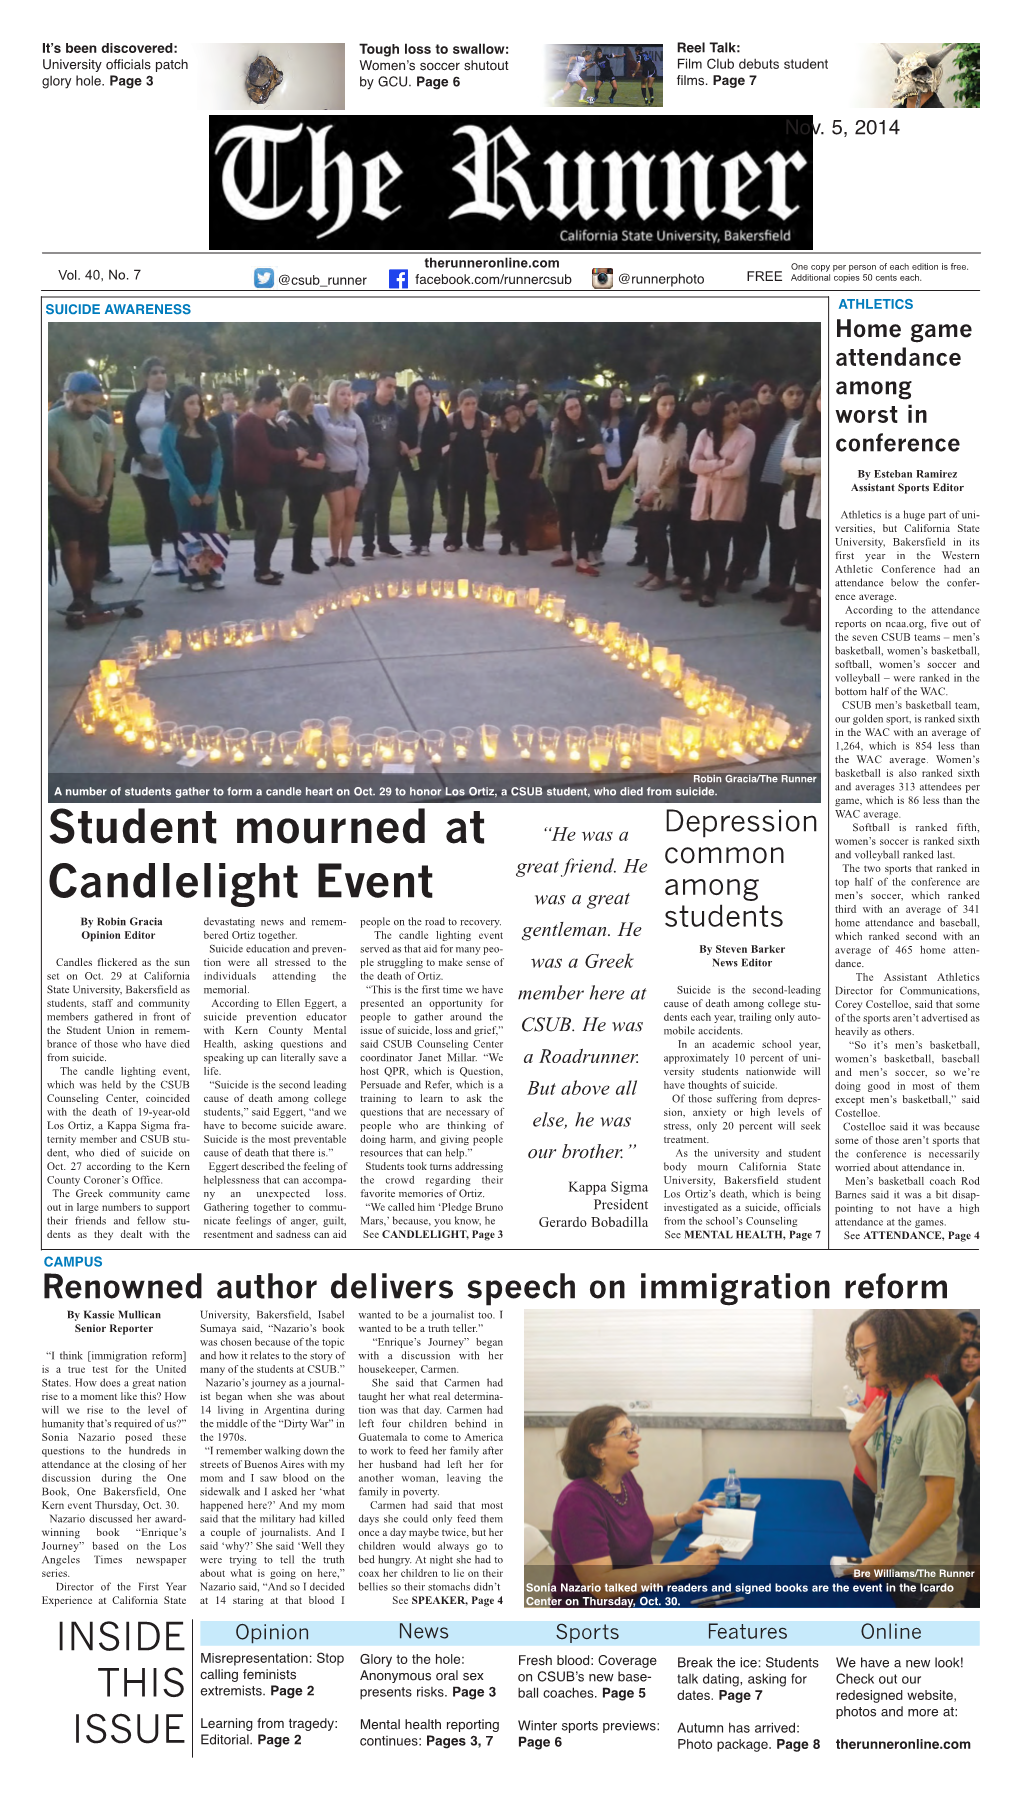 Student Mourned at Candlelight Event